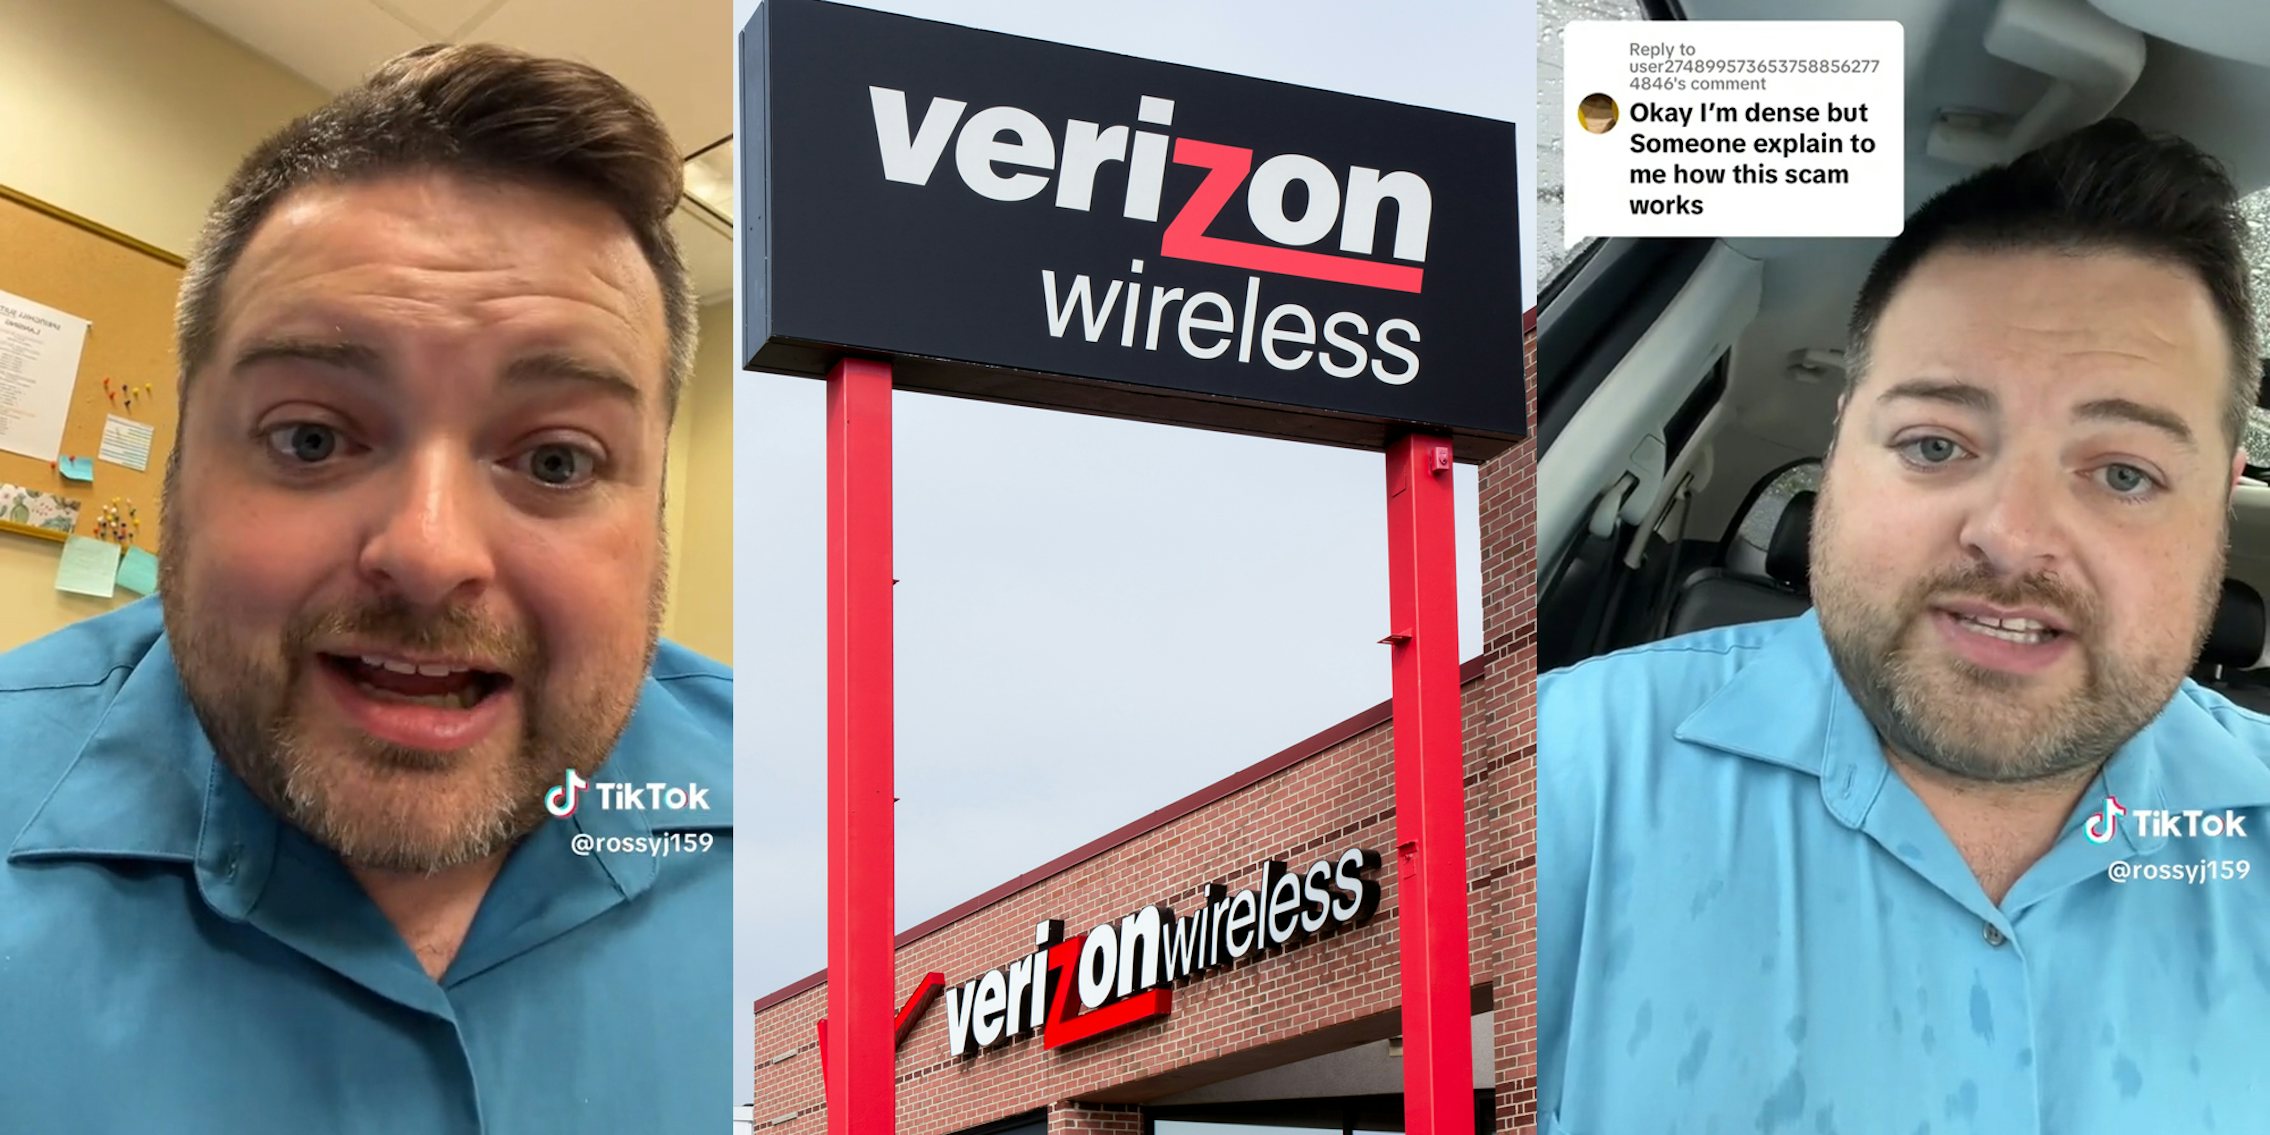 man explaining hotel delivery scam (l&r) Verizon wireless sign (c)